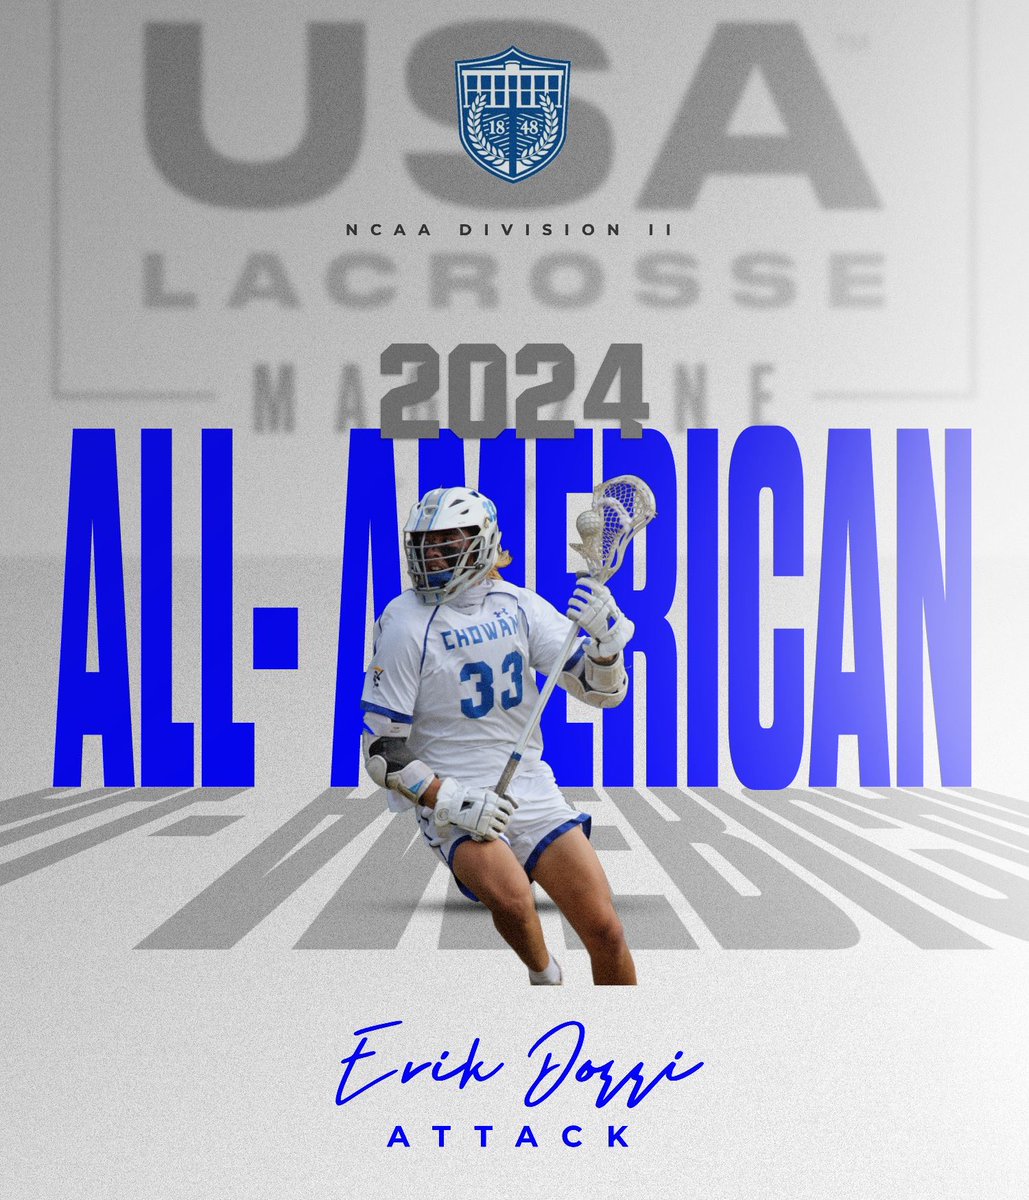 Erik Dozzi is an All-American Dozzi earns US Lacrosse Magazine DII Honorable Mention All-American honors for the 2024 season! Erik led all of Division II in Points Per Game with 6.14 #boroboy #handsteam #meerkat #DAWG